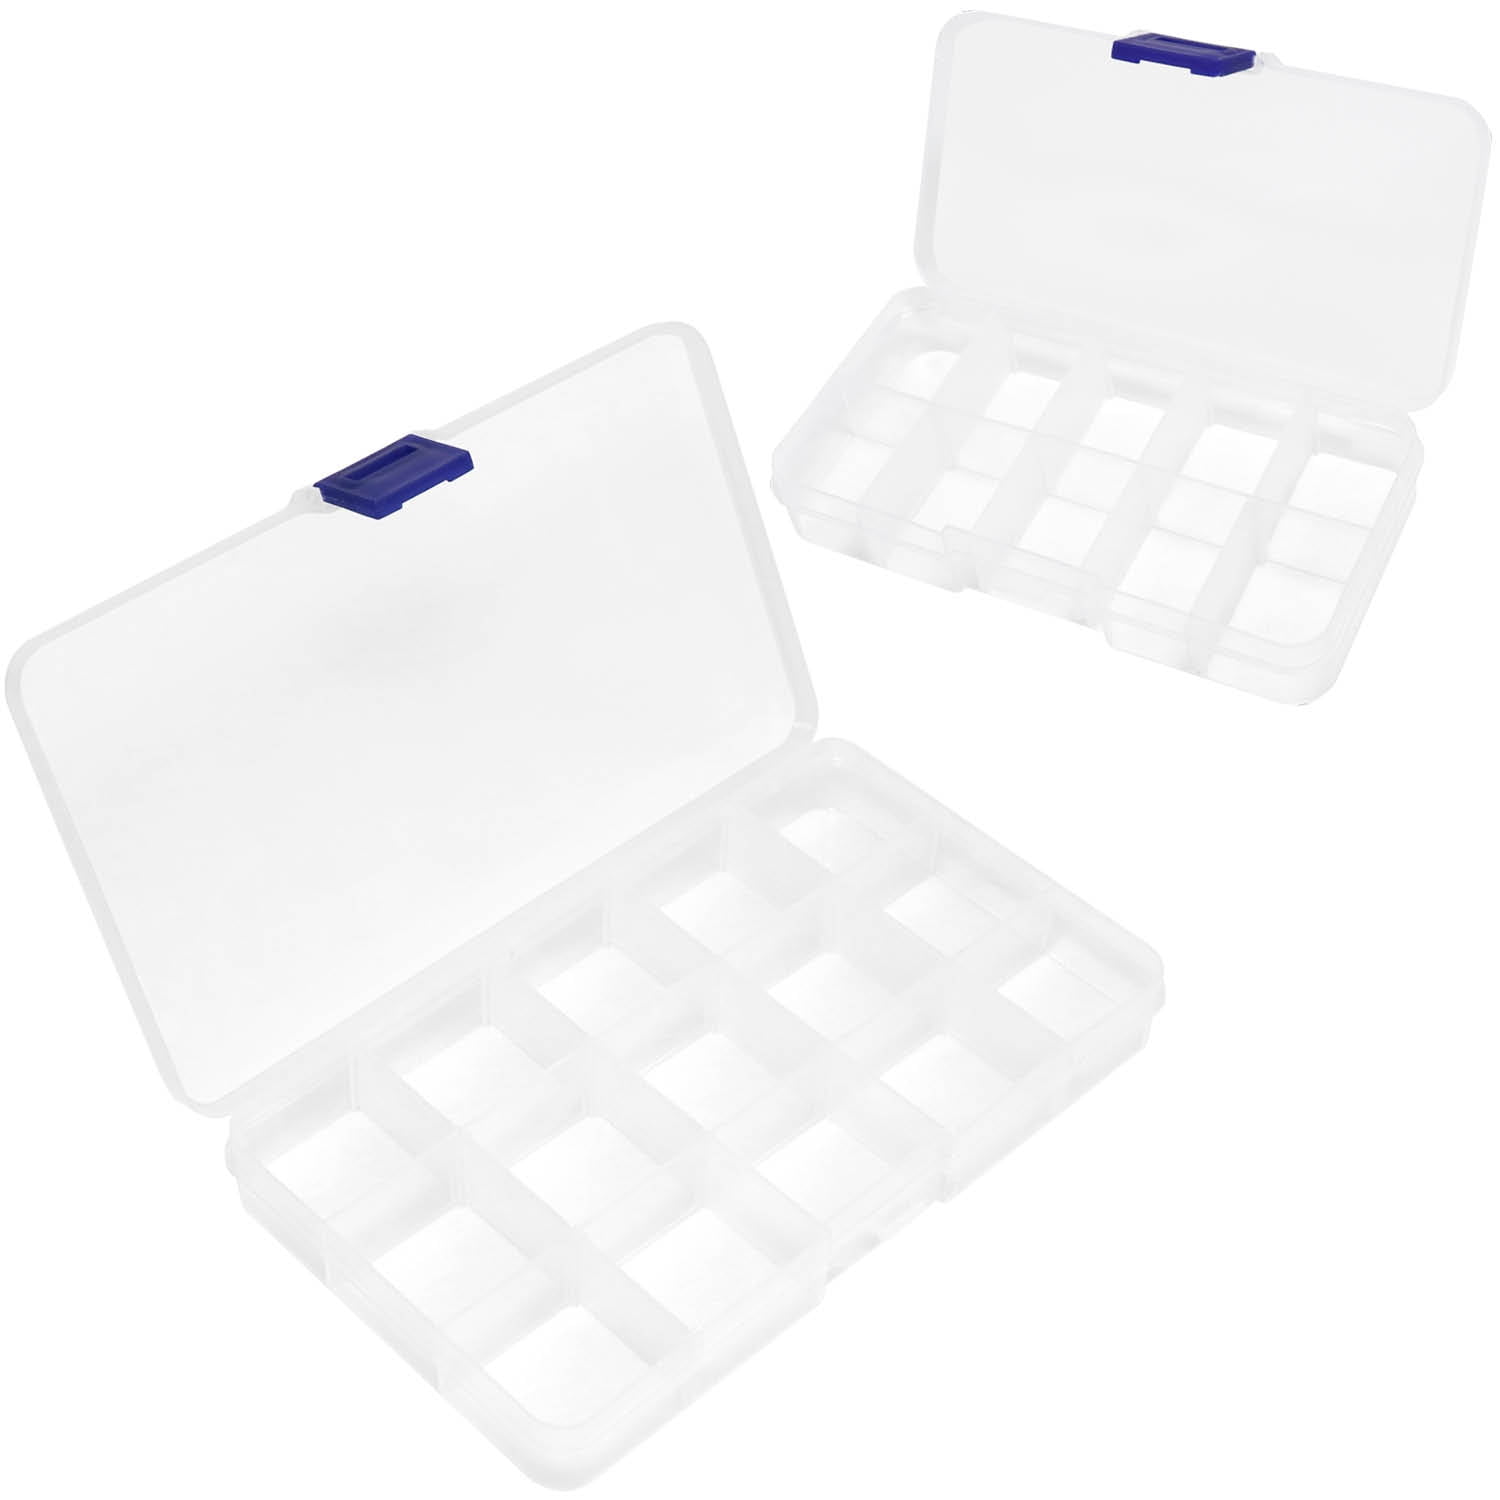 2x Craft Box Organizer Storage Container for Beads, Adjustable 15 Grid  Dividers, PACK - Harris Teeter